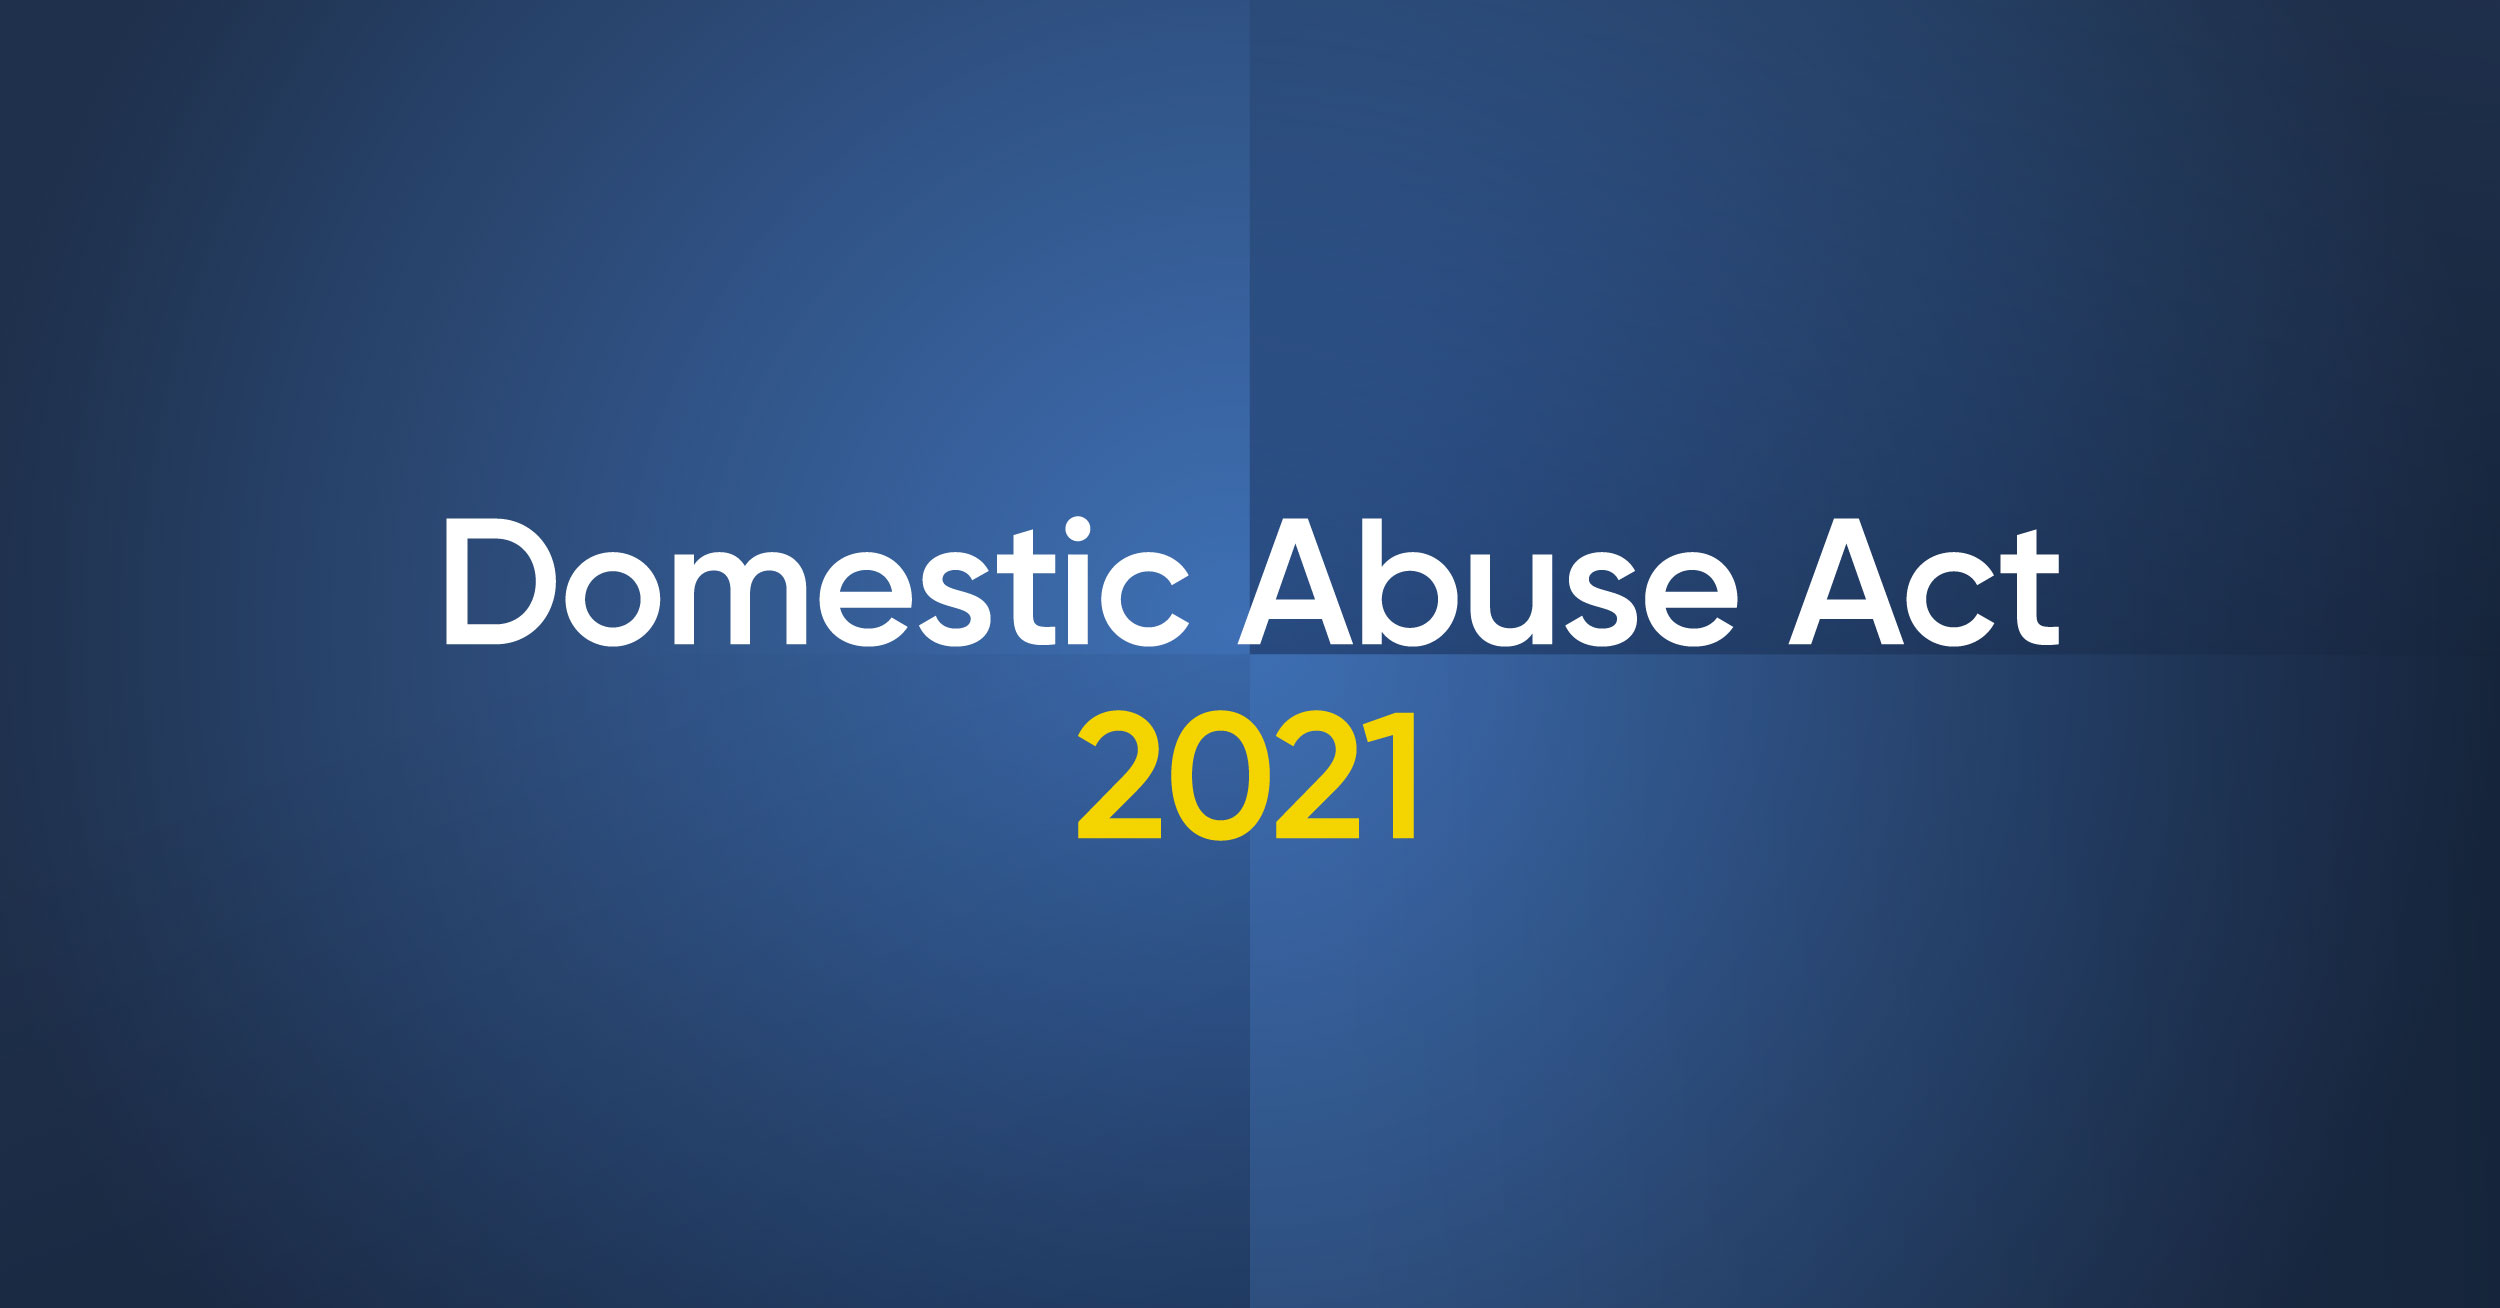 domestic abuse act 2021 essay